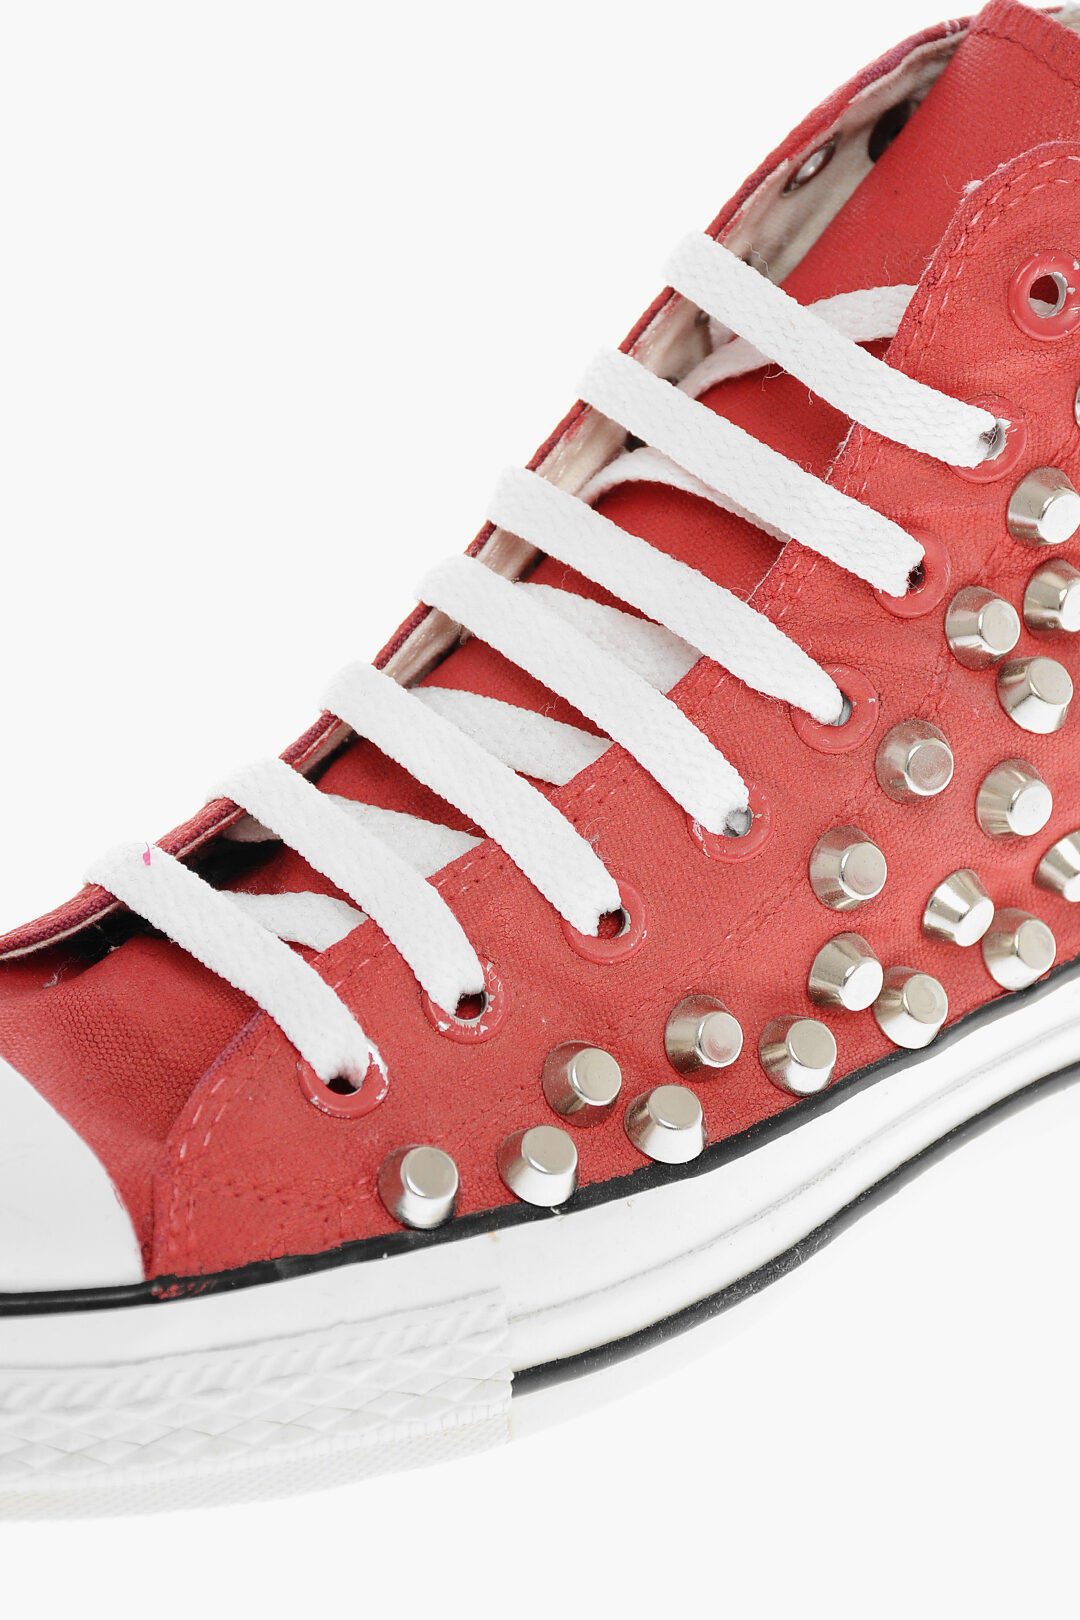 Converse ALL STAR Studded Canvas High women - Glamood Outlet